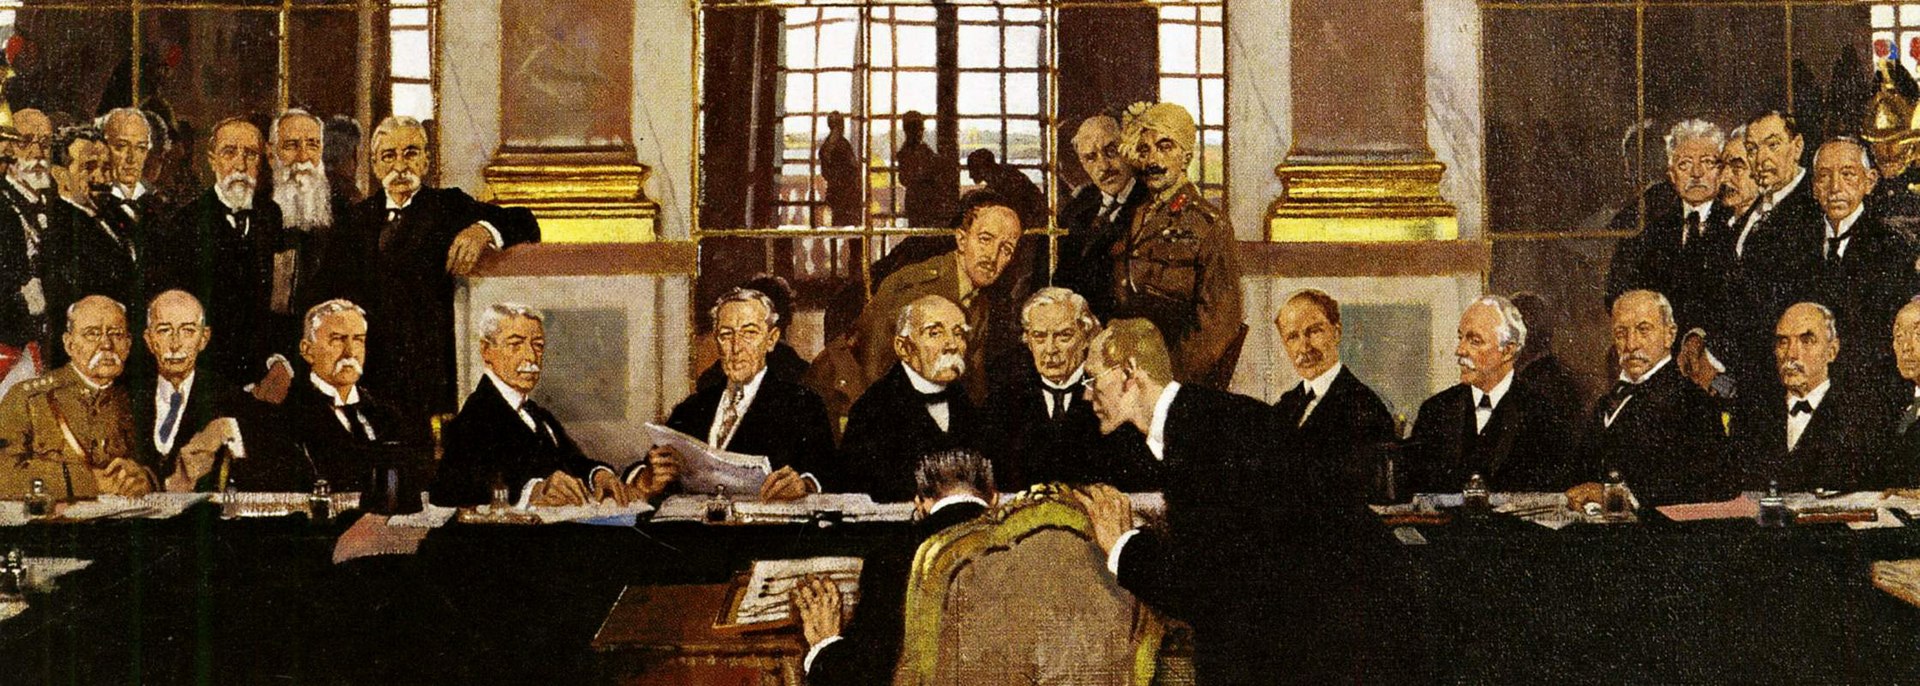 The Treaty of Versailles, signed at the Palace of Versailles in France, marking the end World War I. 